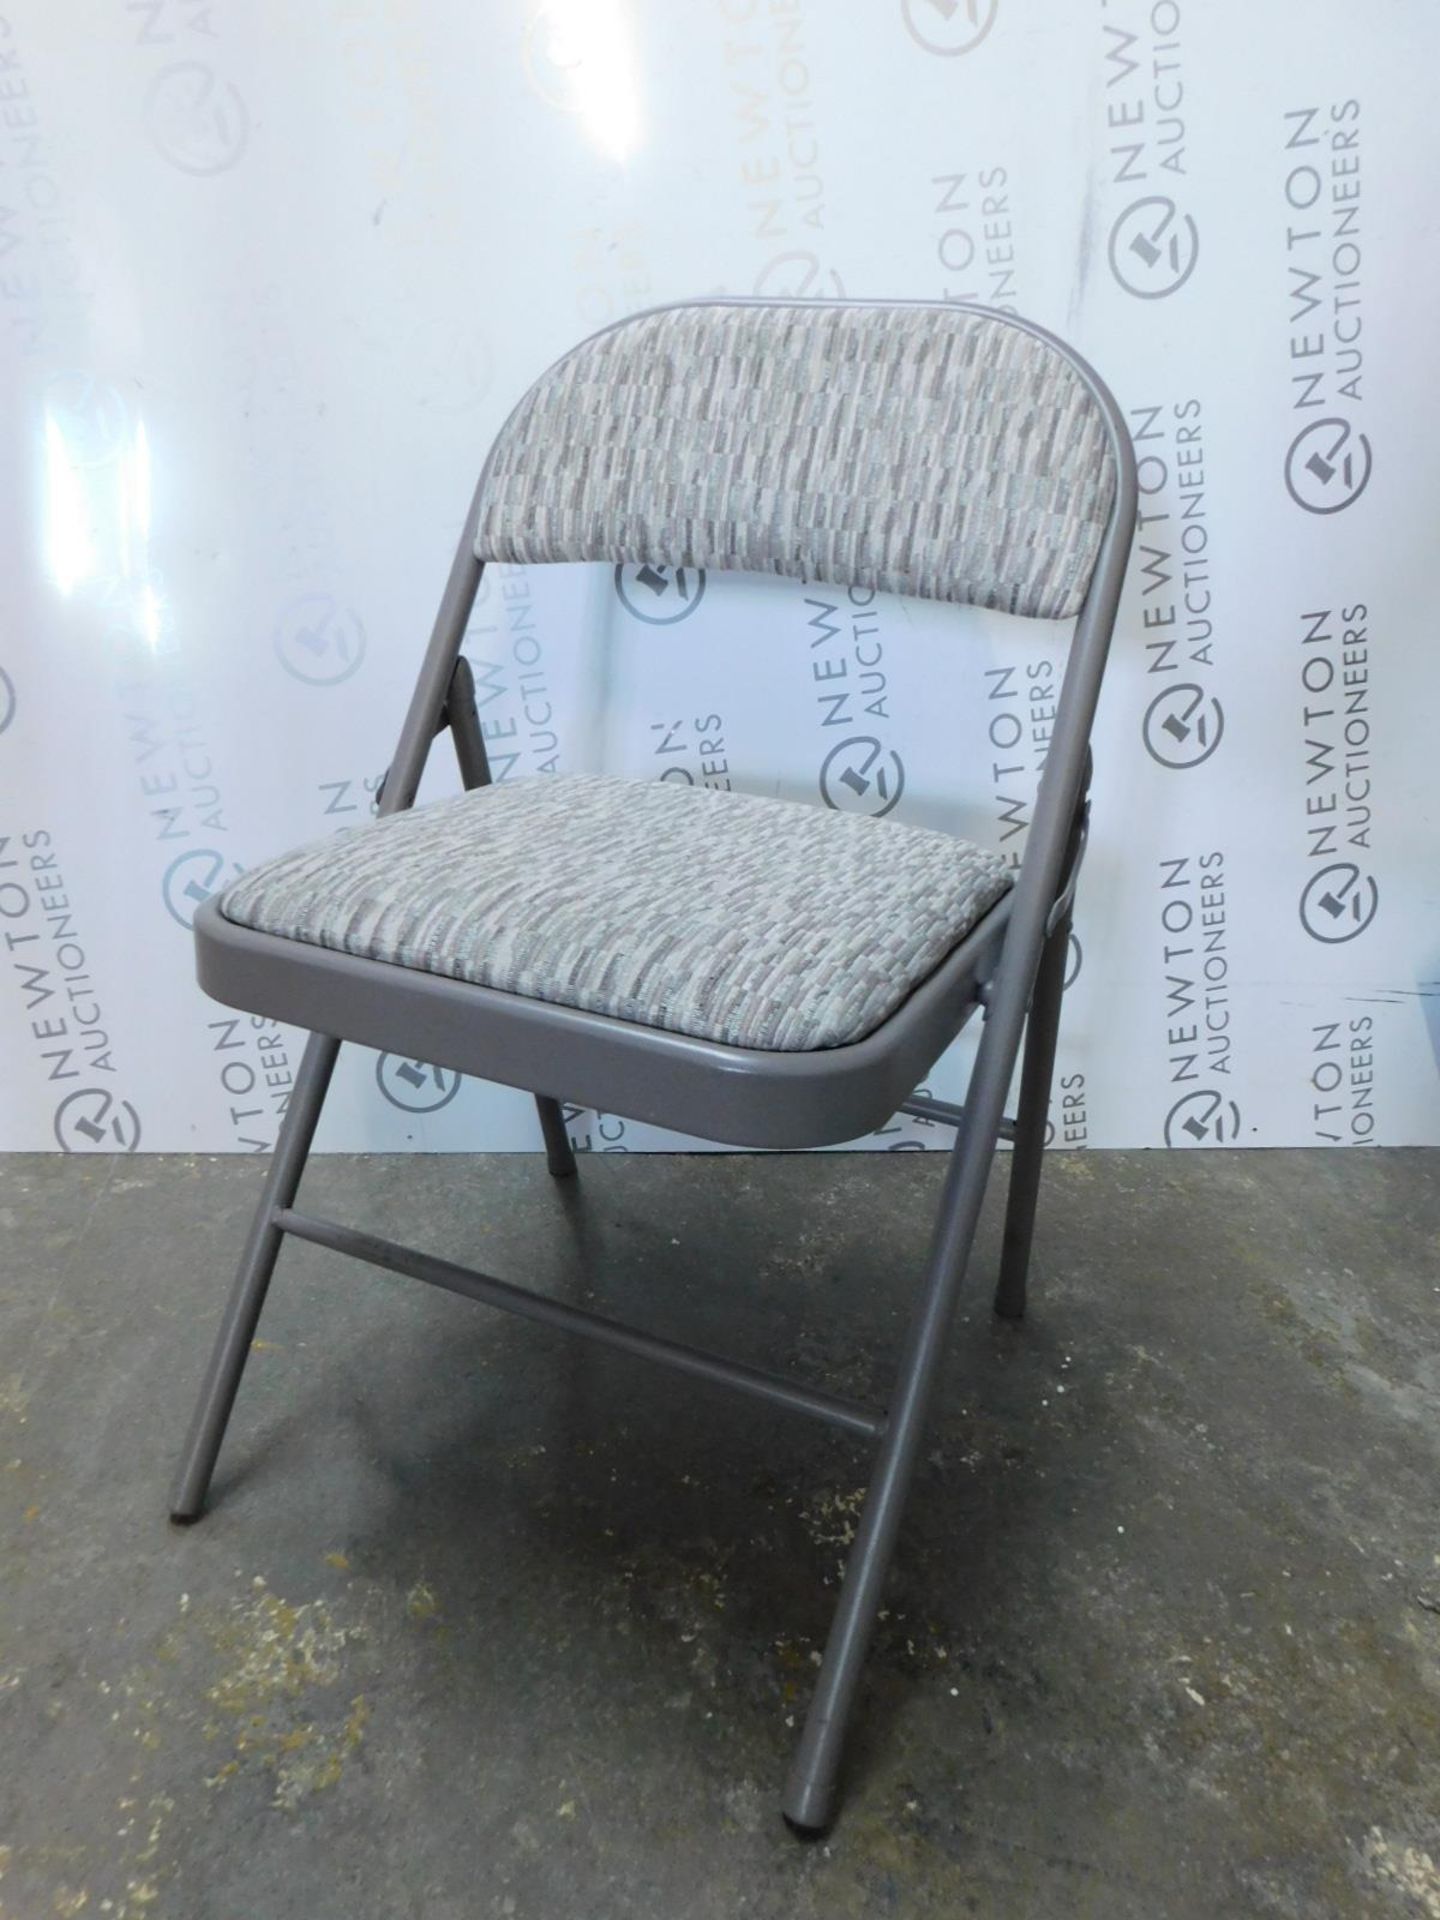 1 MECO DELUXE PADDED STEEL FABRIC FOLDING GUEST CHAIR RRP Â£29.99